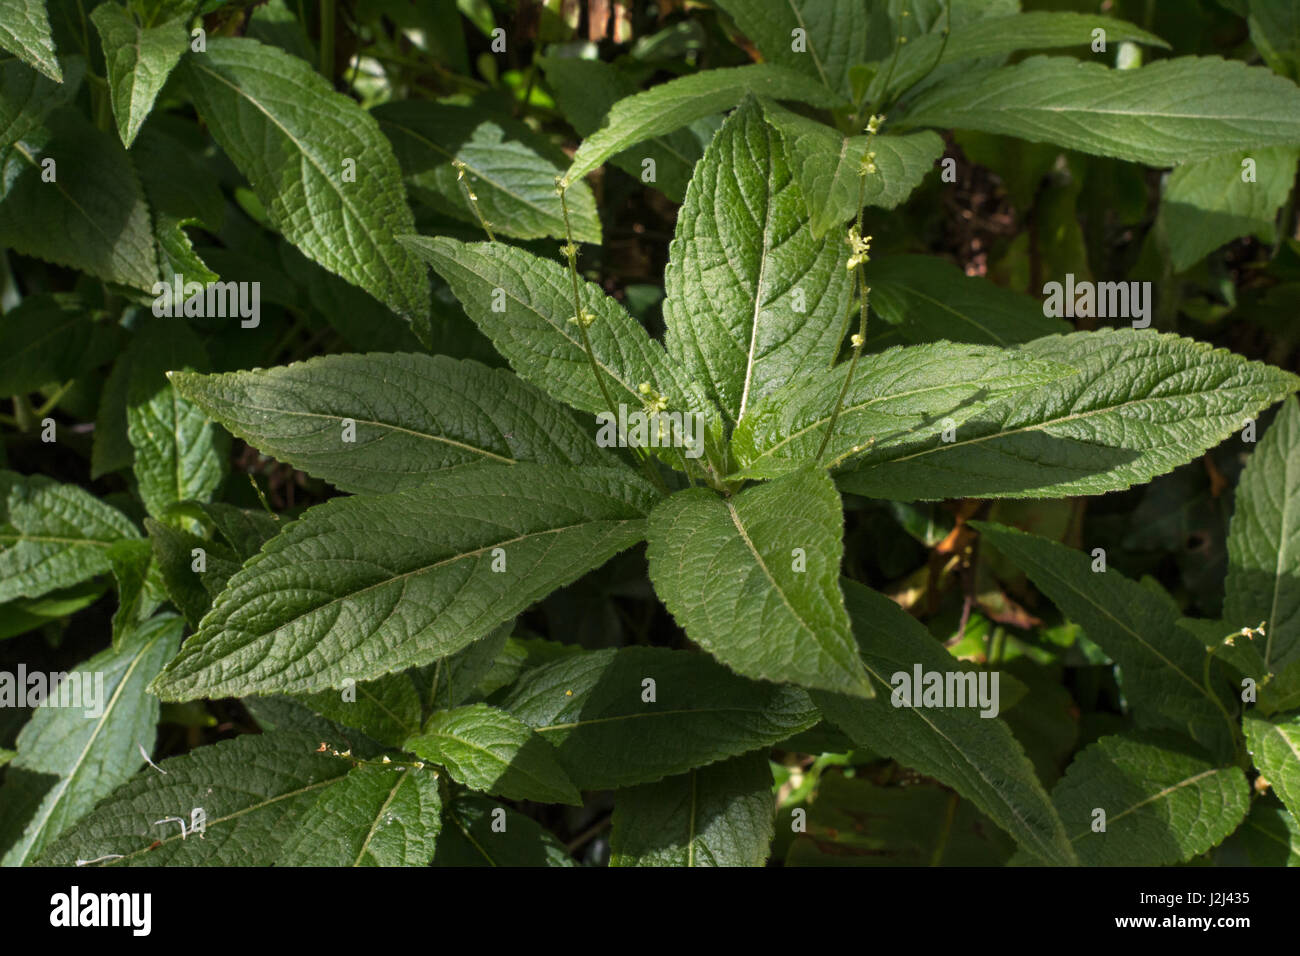 Dog's Mercury / Mercurialis perennis in flower - a poisonous plant found in hedgerows and glades during the Springtime. Stock Photo